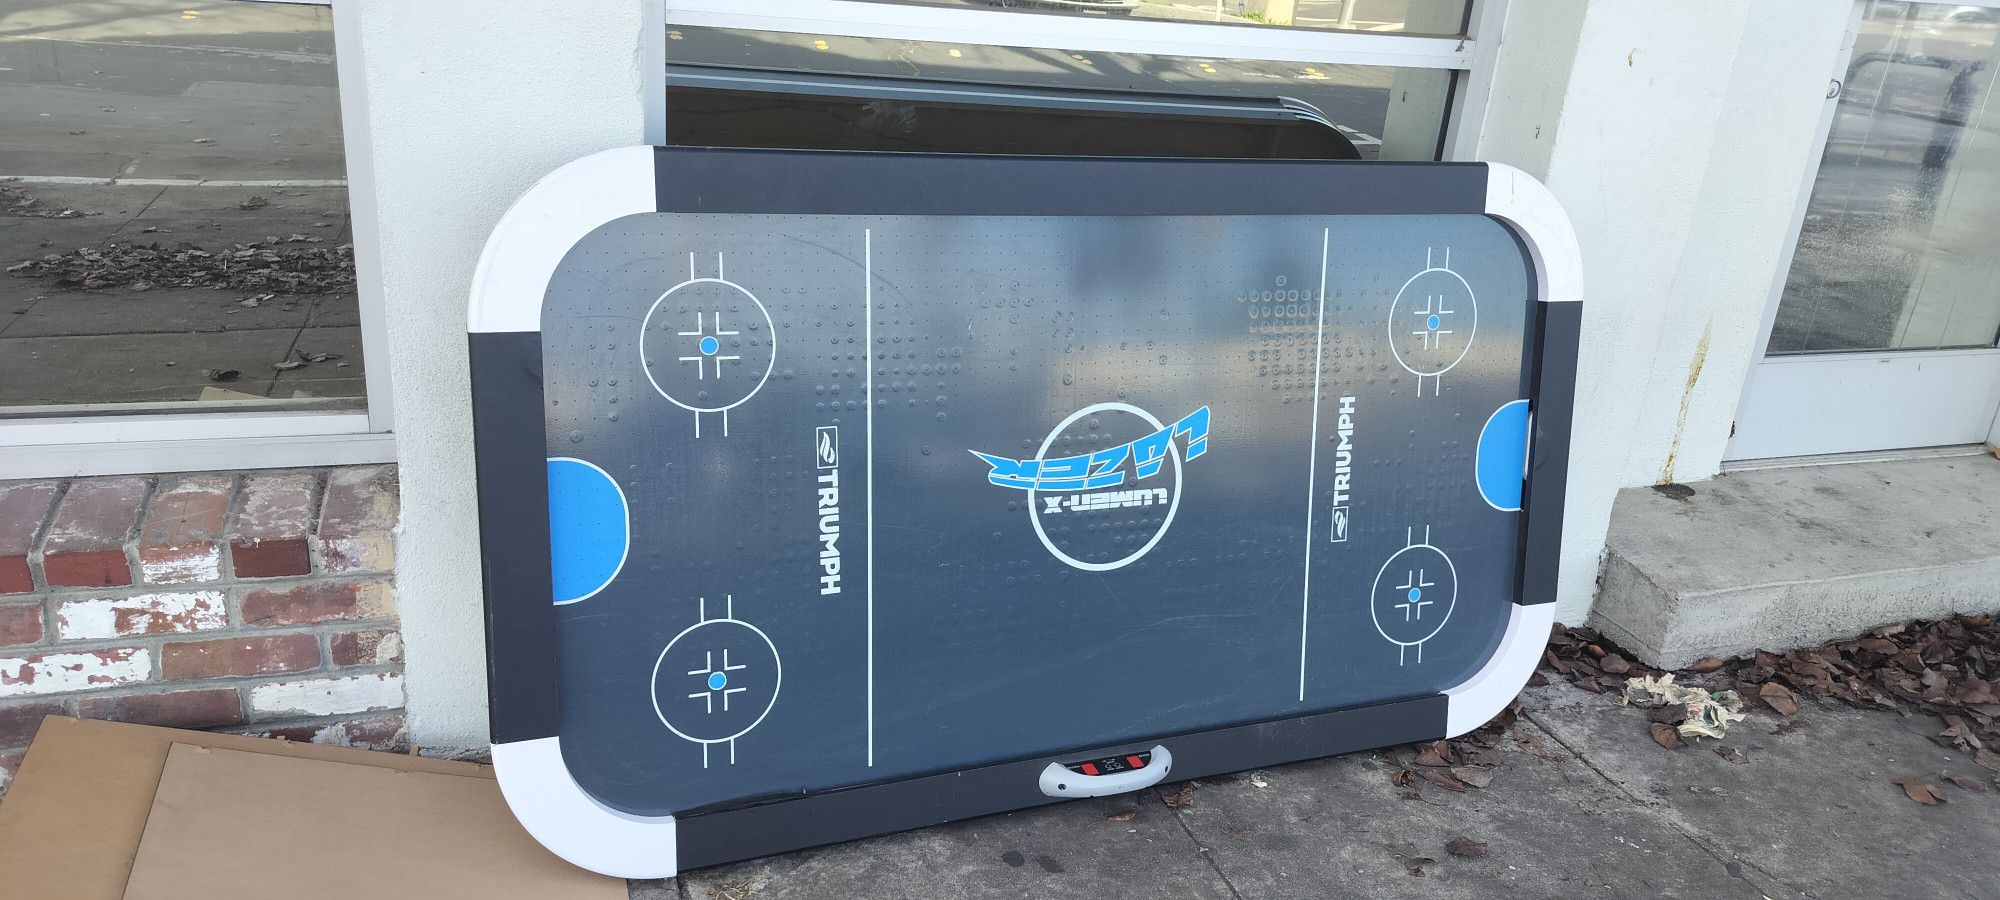 Triumph Air Hockey Table Works Great Plus Extras